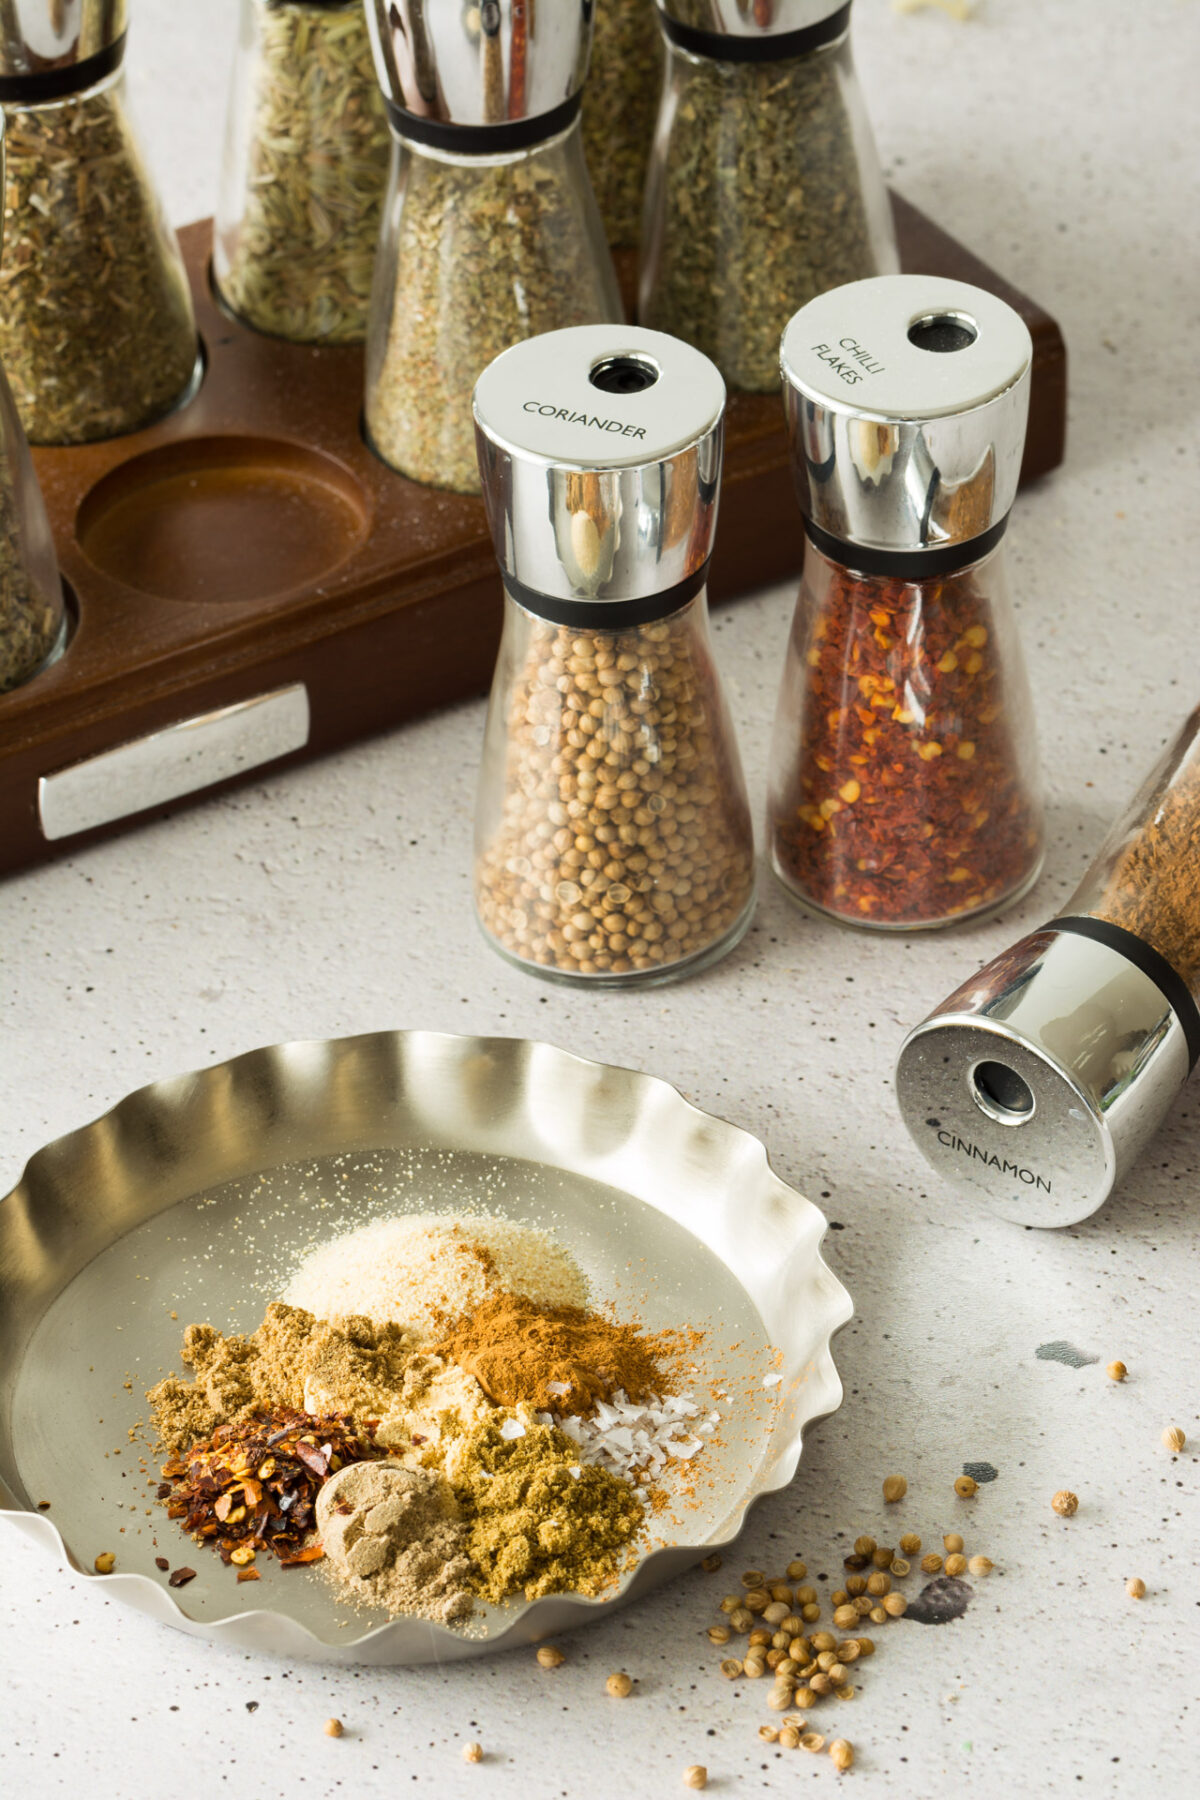 an image of seasoning and spices, coriander, chili flakes, cinnamon mix together 